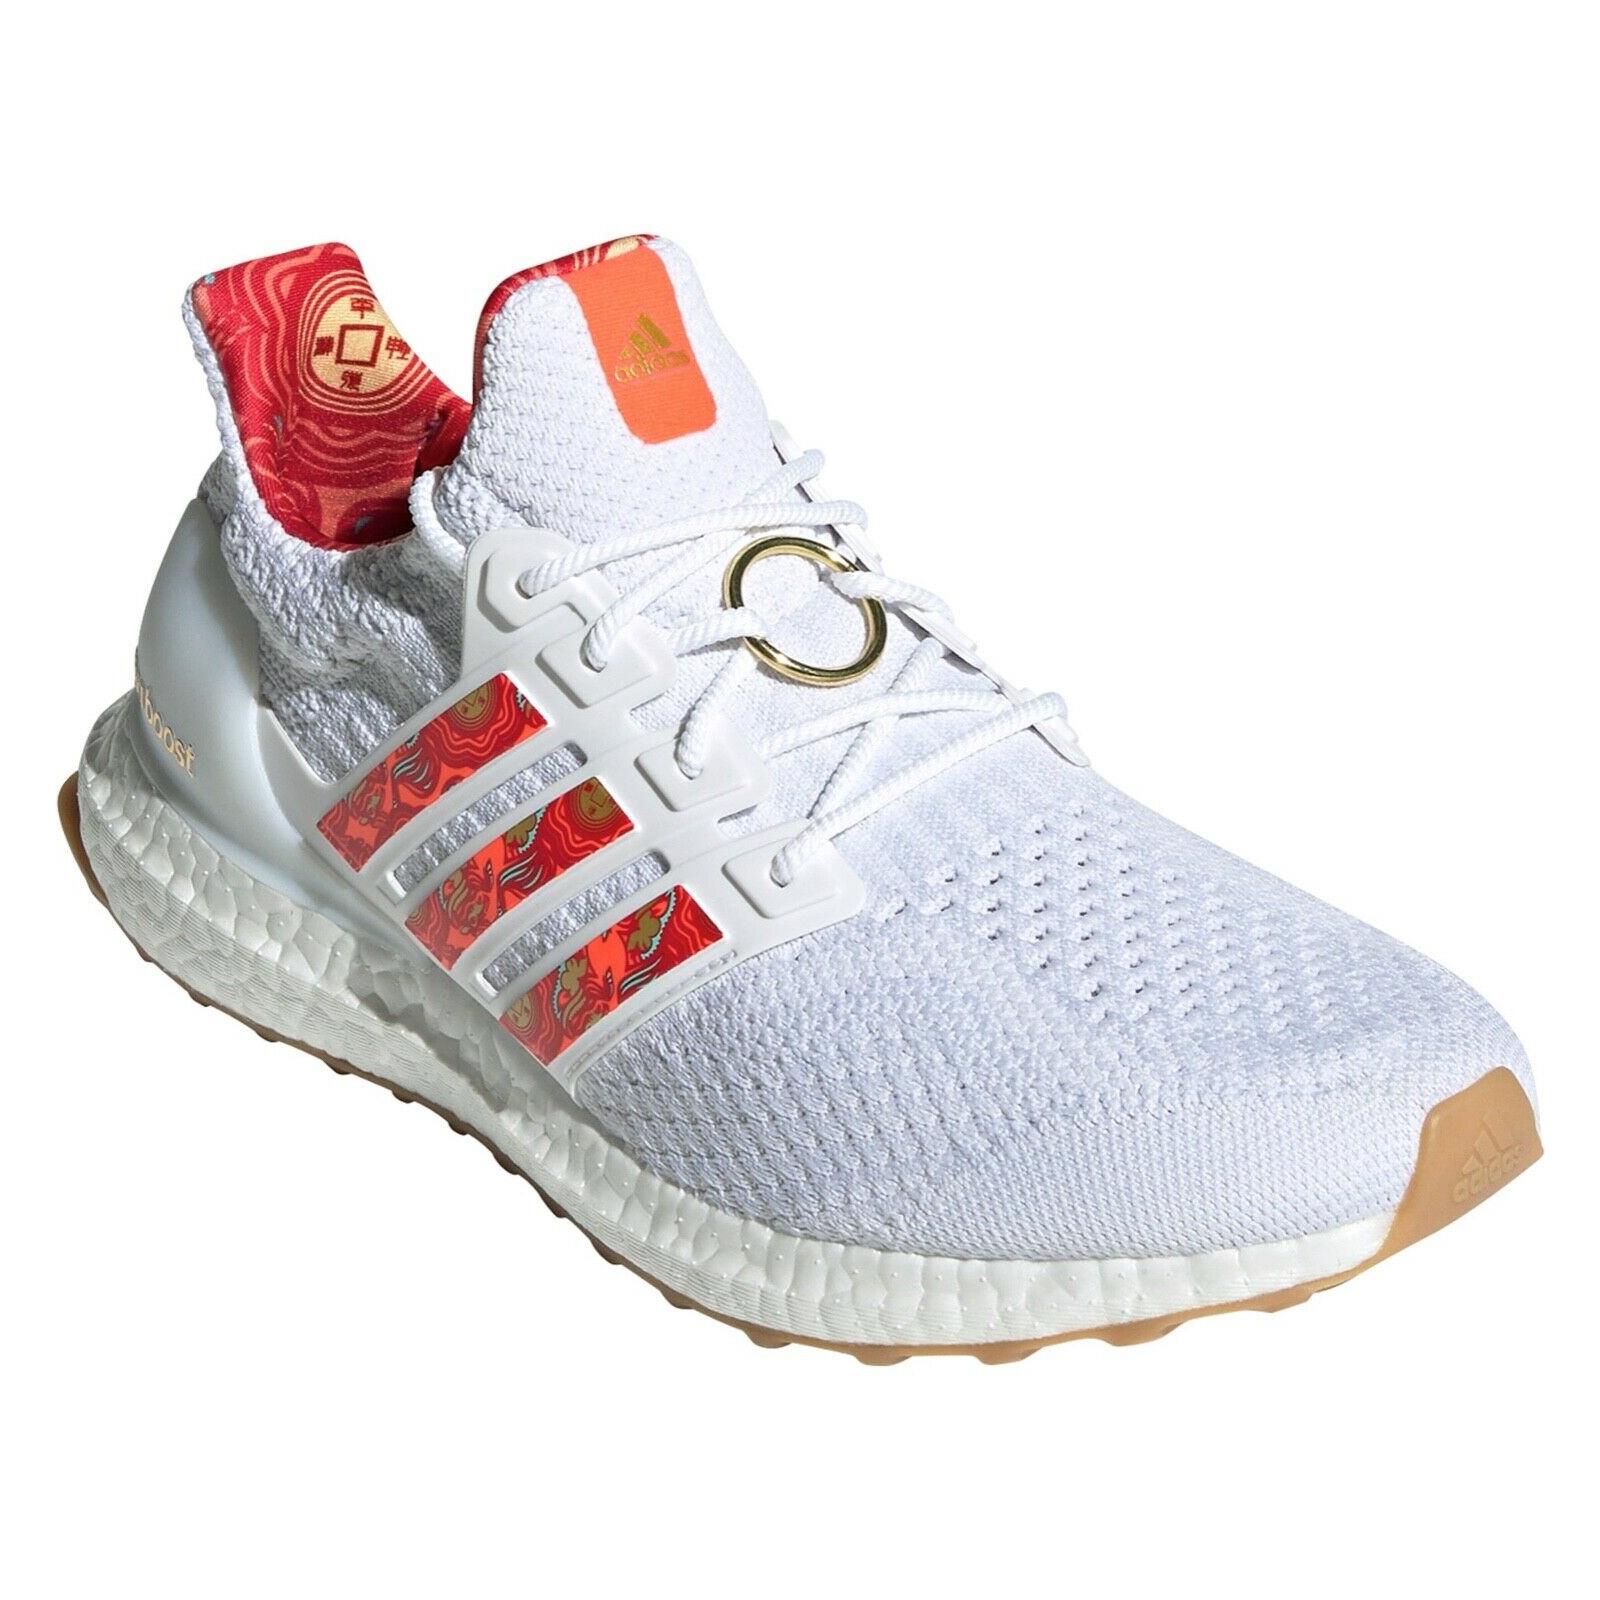 Adidas Ultraboost 5.0 Cny Chinese Year Whit Red Gold 7.5 GW7659 Running Shoe